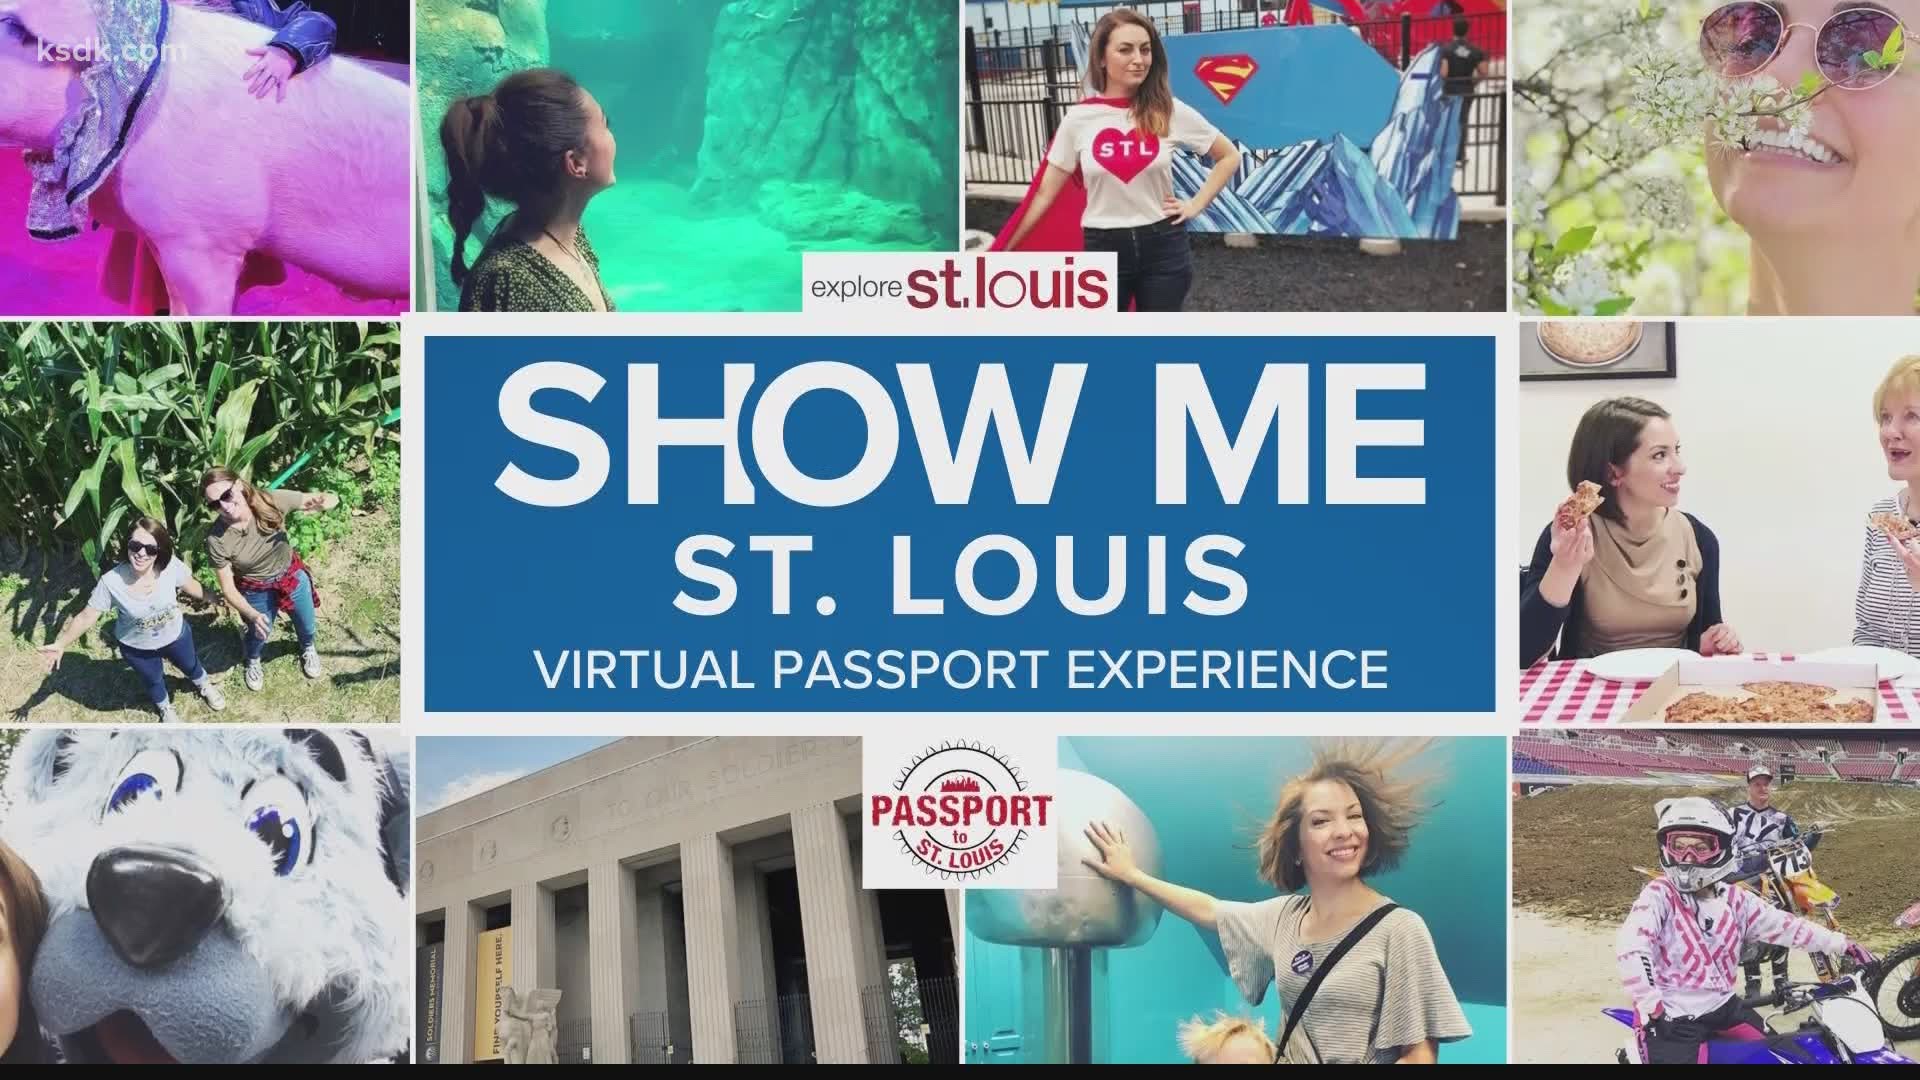 As attractions around St. Louis begin to re-open, Explore St. Louis wants locals to get out and re-explore their city responsibly.